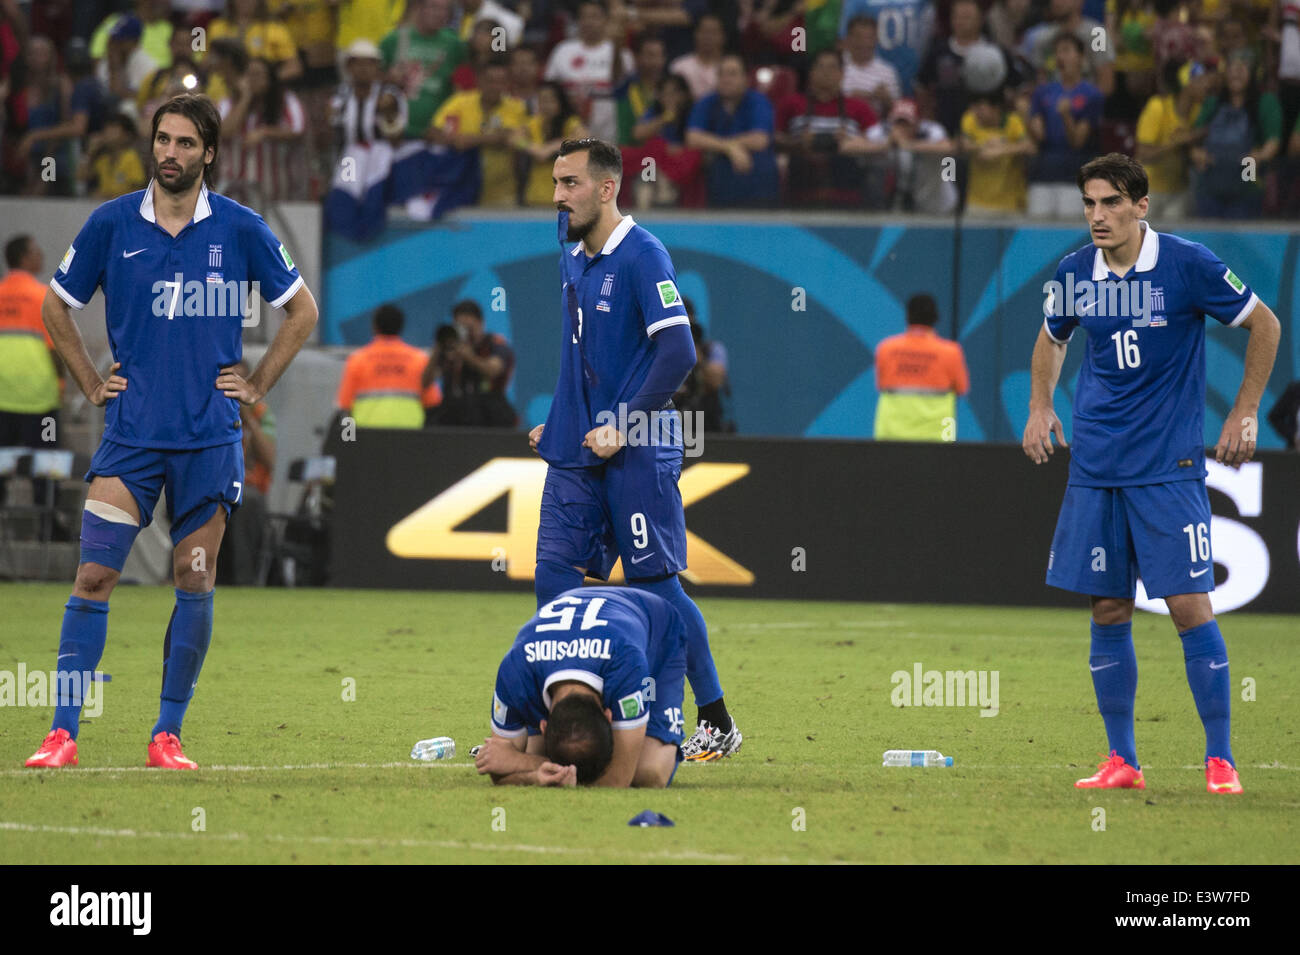 Recife, Brazil. 29th June, 2014. Greece team group (GRE) Football/Soccer : Theofanis Gekas of Greece looks dejected after missing in the penalty shoot-out during the FIFA World Cup Brazil 2014 Round of 16 match between Costa Rica 1(5-3)1 Greece at Arena Pernambuco in Recife, Brazil . Credit:  Maurizio Borsari/AFLO/Alamy Live News Stock Photo